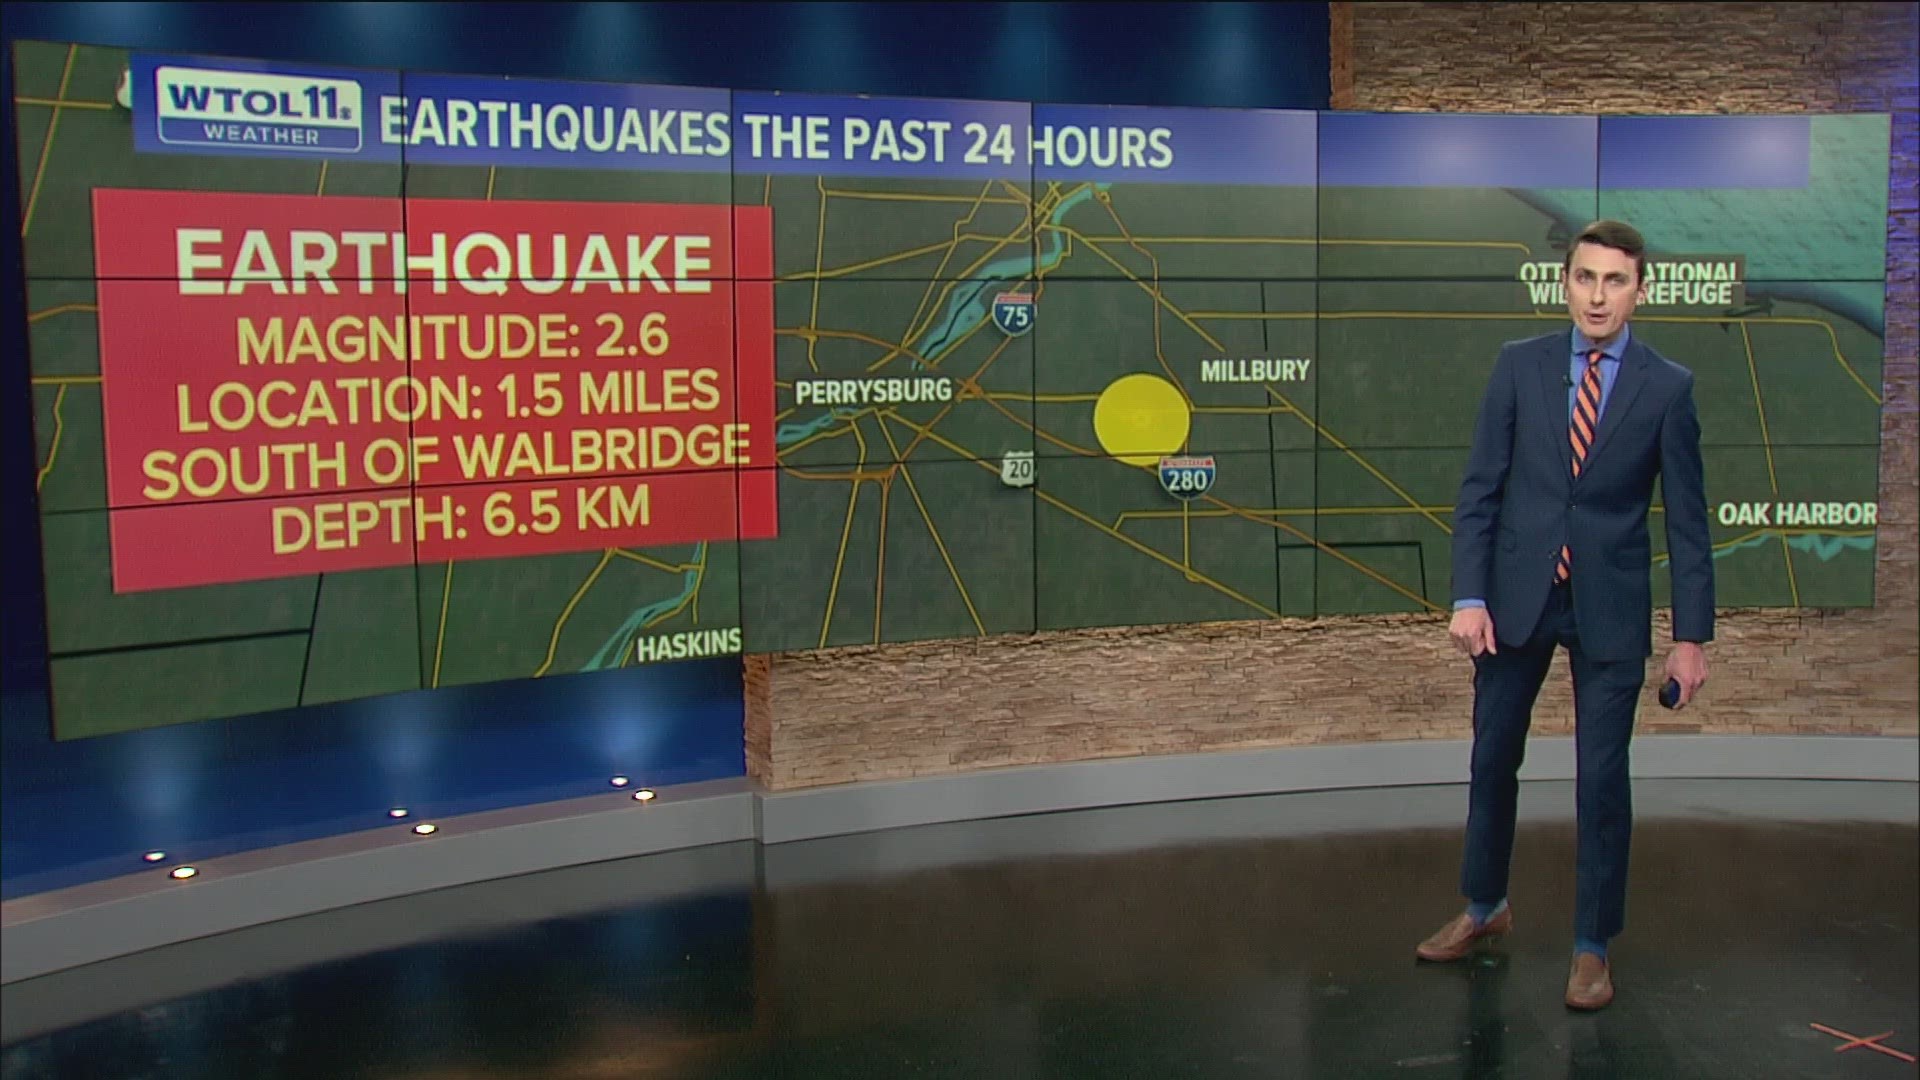 The minor 2.6 magnitude earthquake happened just south of Walbridge at about 8:17 p.m.